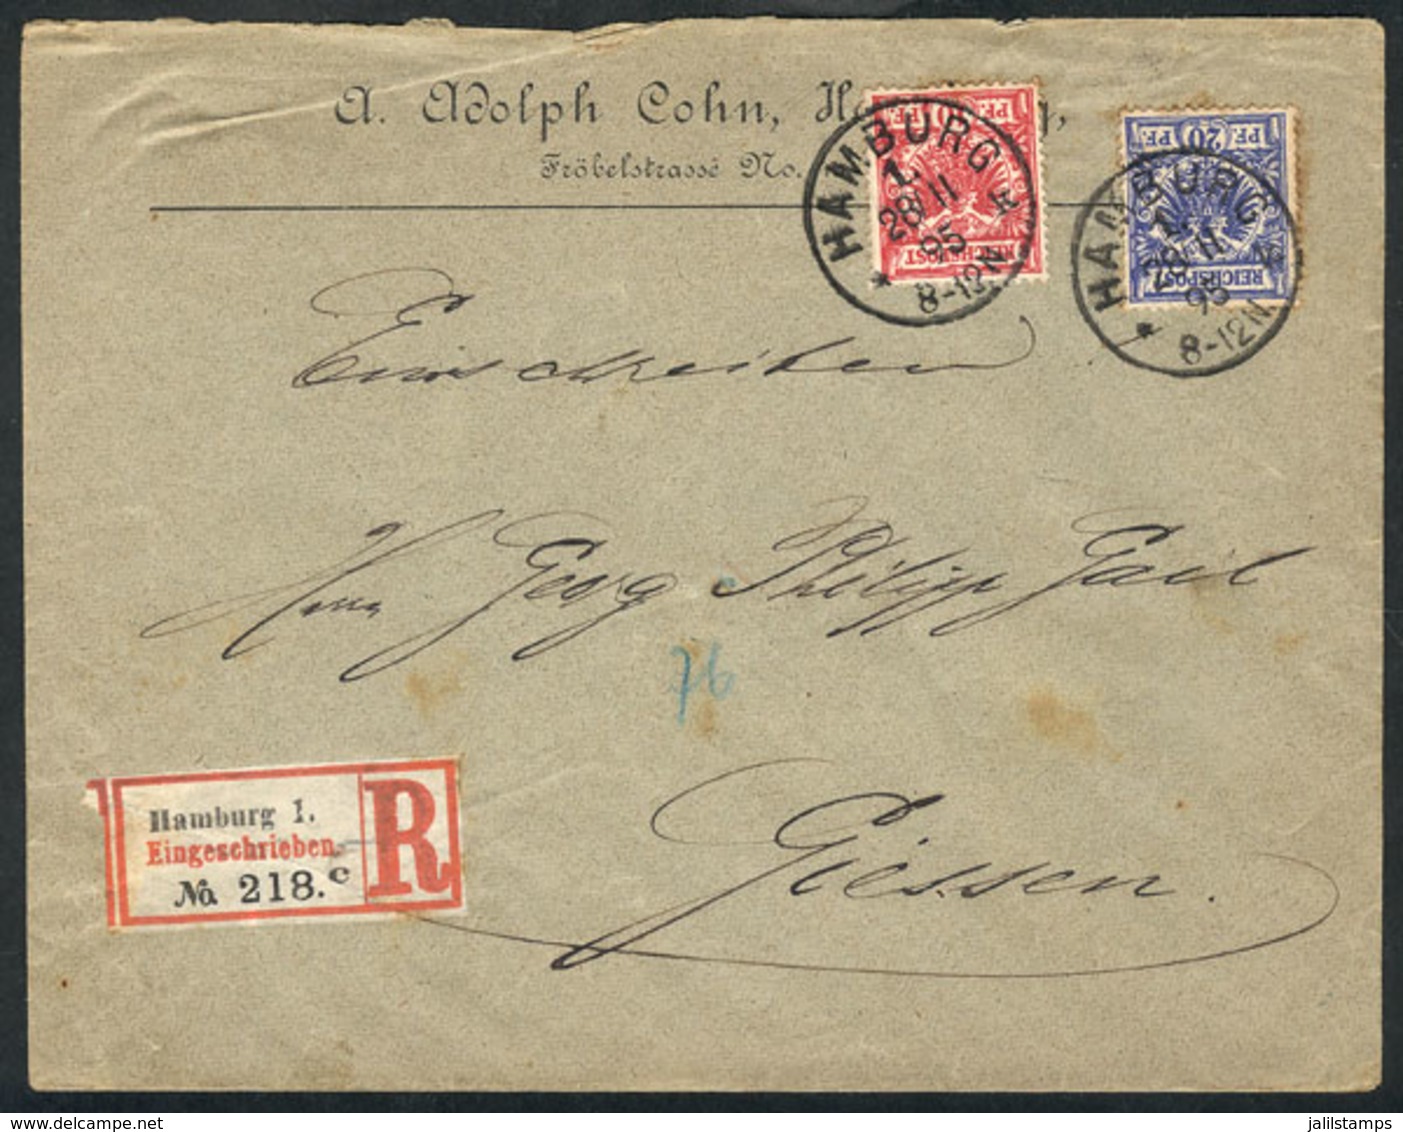 GERMANY: Registered Cover Sent From Hamburg To Giesse On 28/NO/1895 Franked With 30Pf., Very Nice! - Briefe U. Dokumente